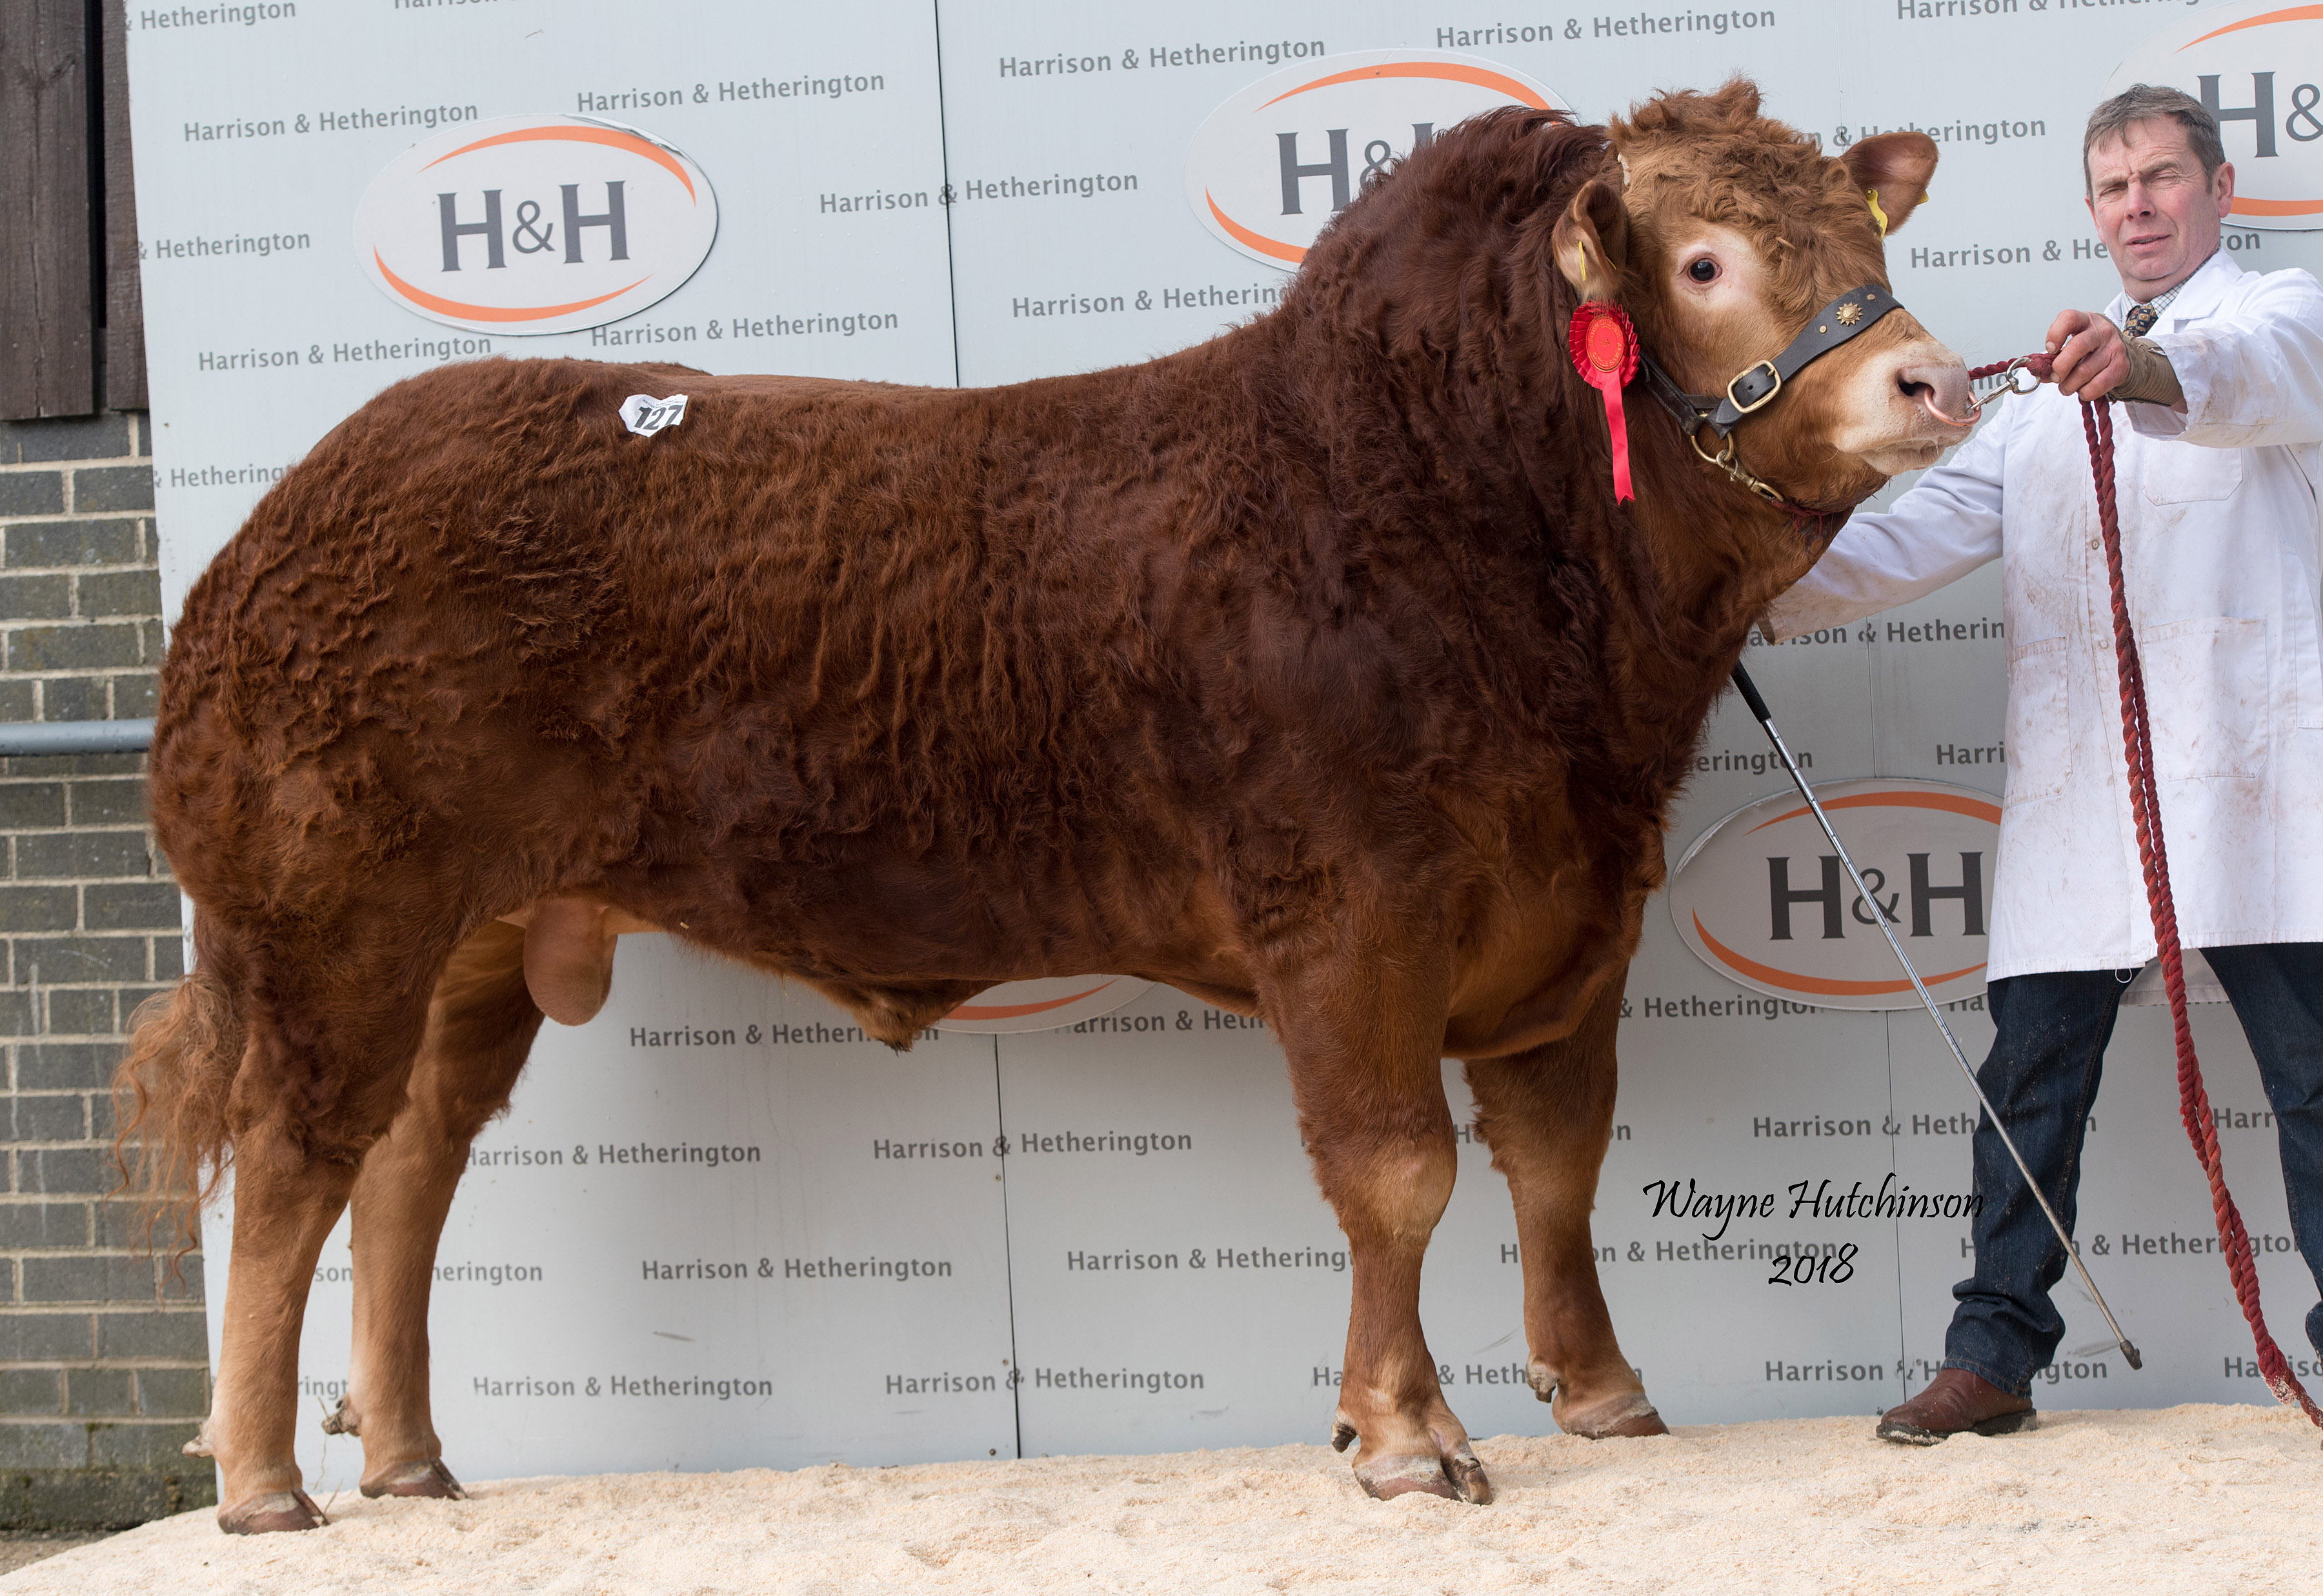 Norman Marley – 14,000gns